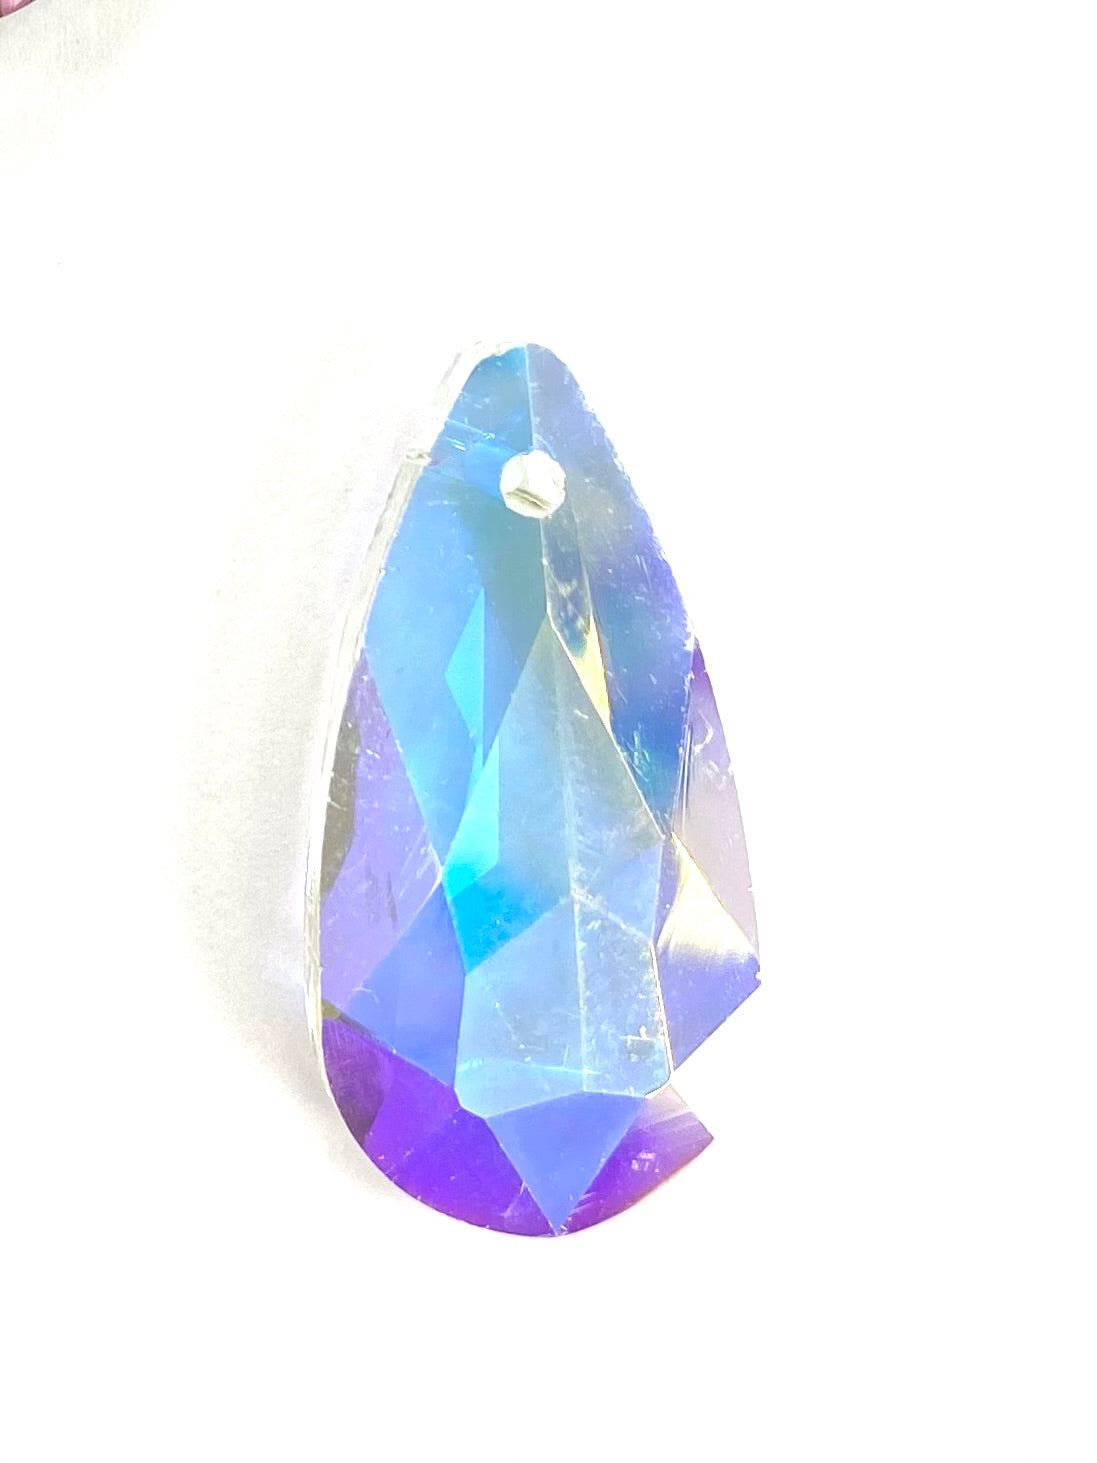 24mm Large Glass Tear Drop Crystal AB 2 pack